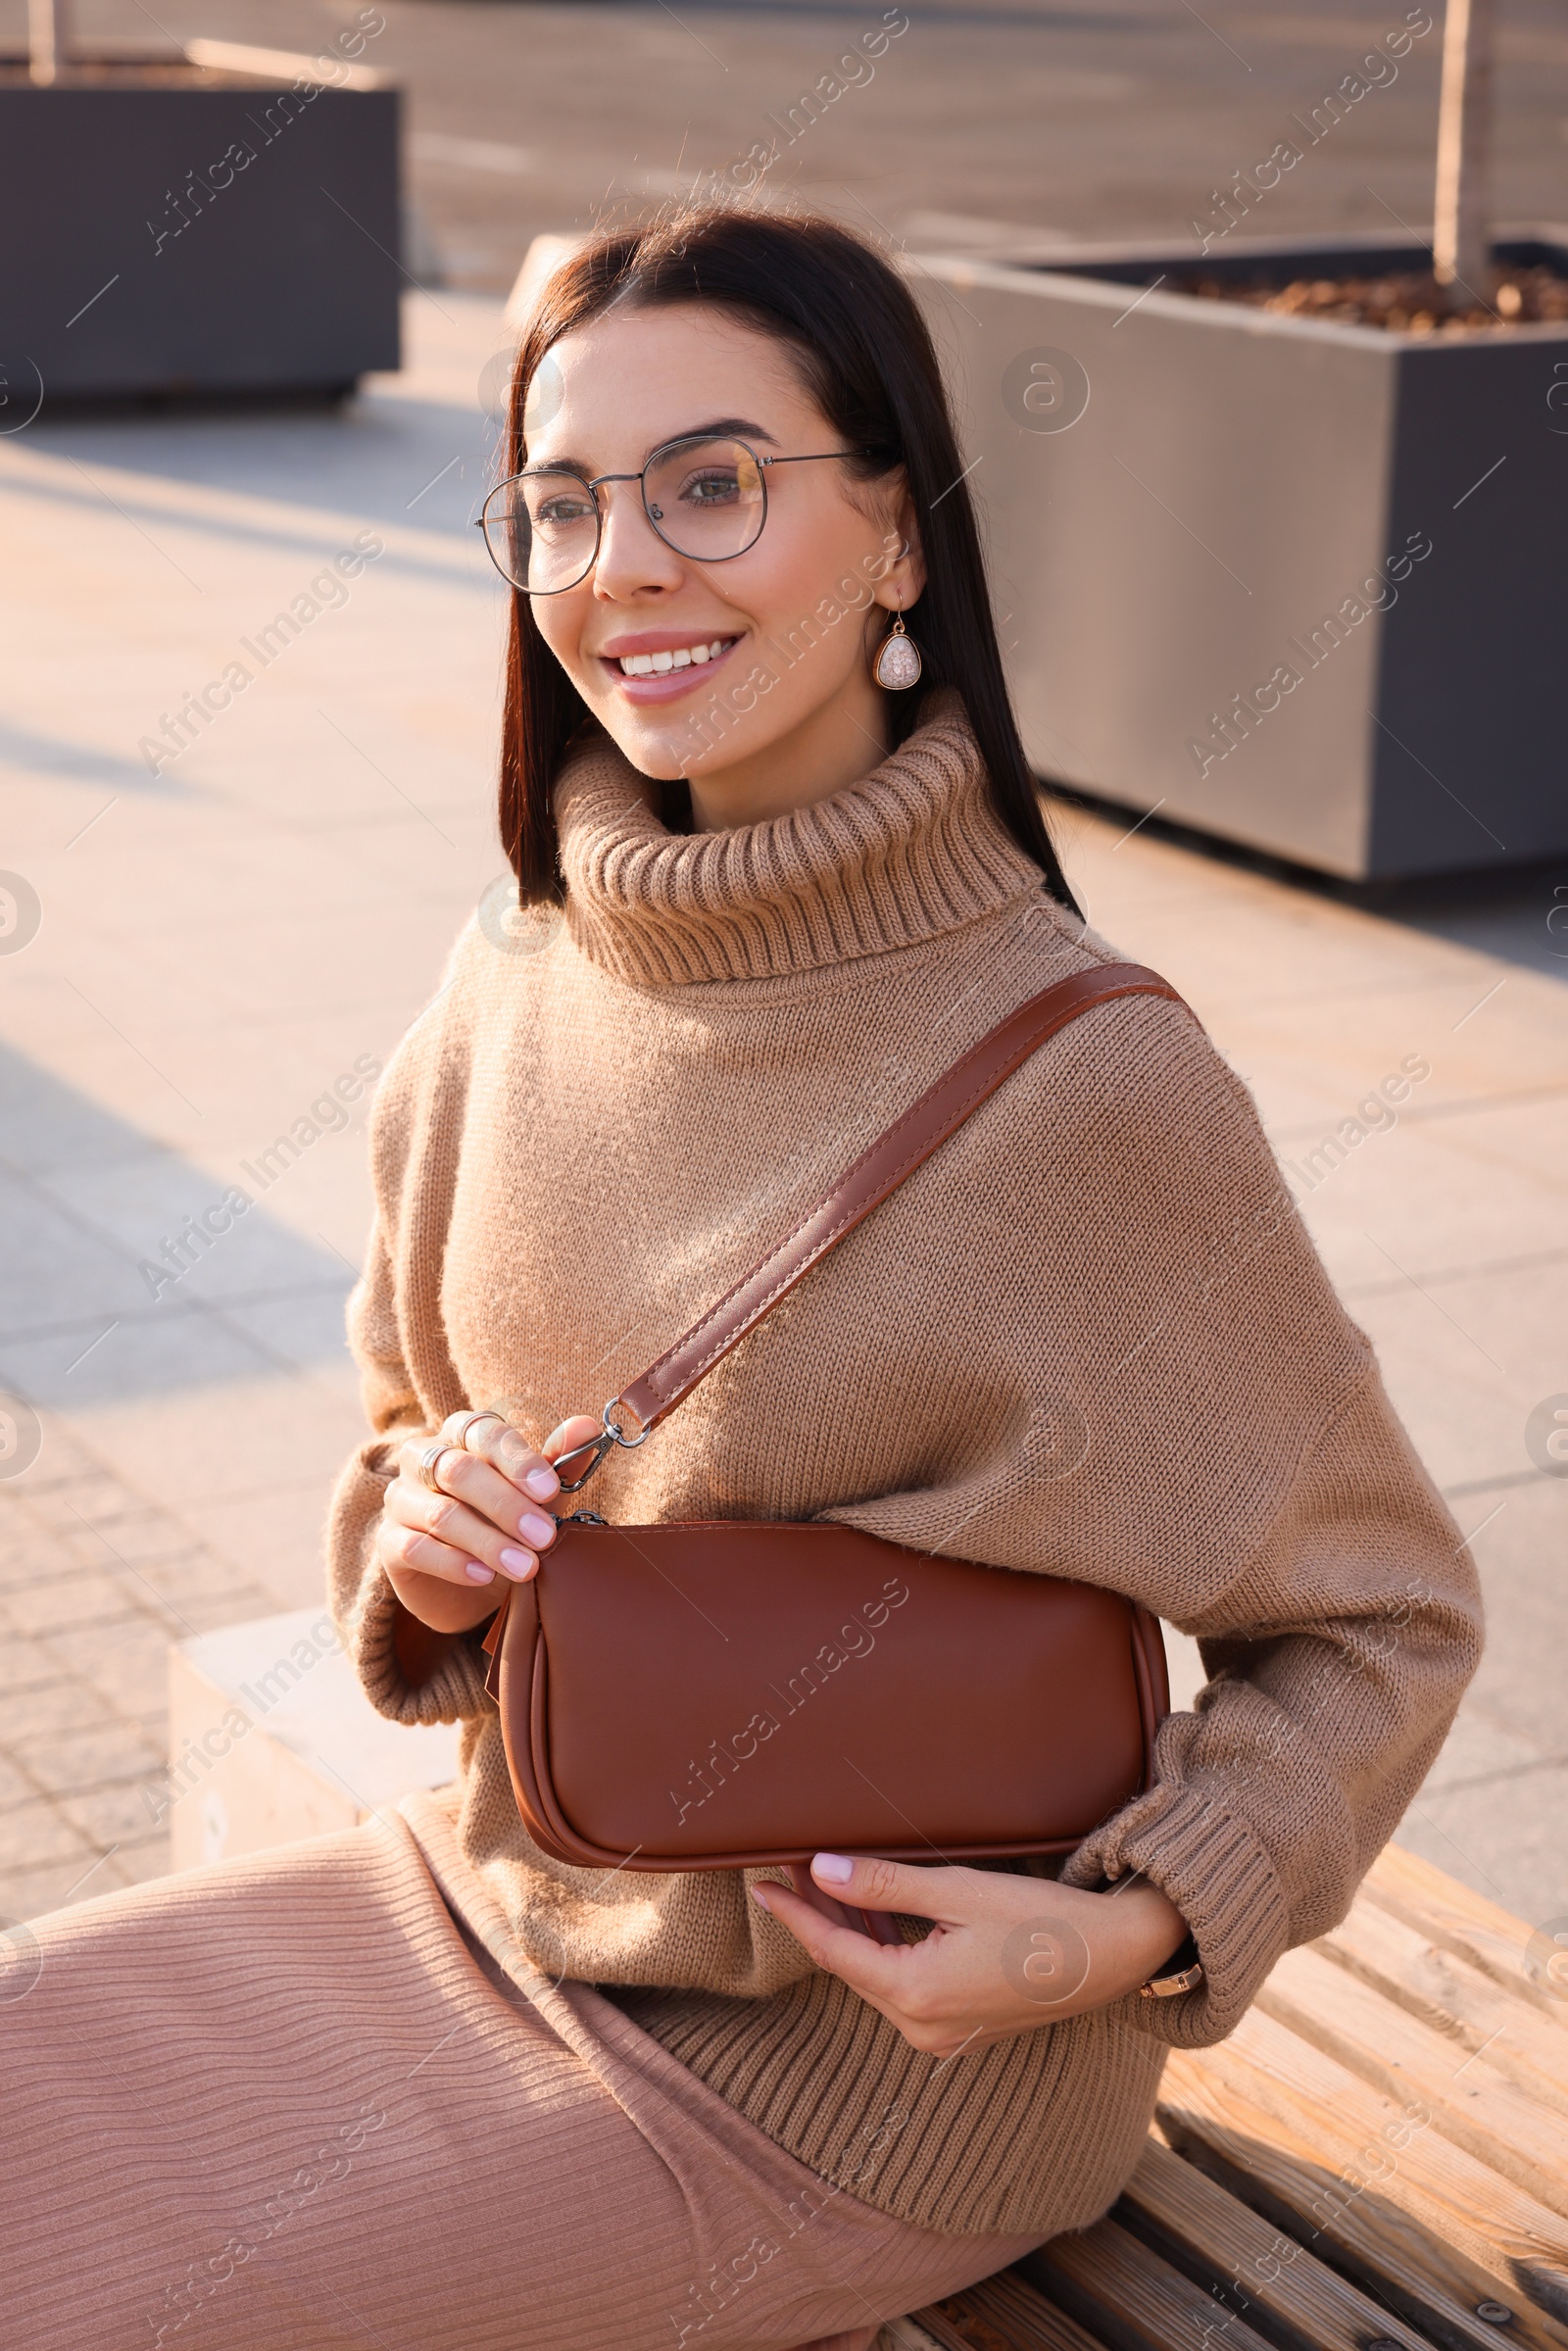 Photo of Fashionable young woman with stylish bag on bench outdoors